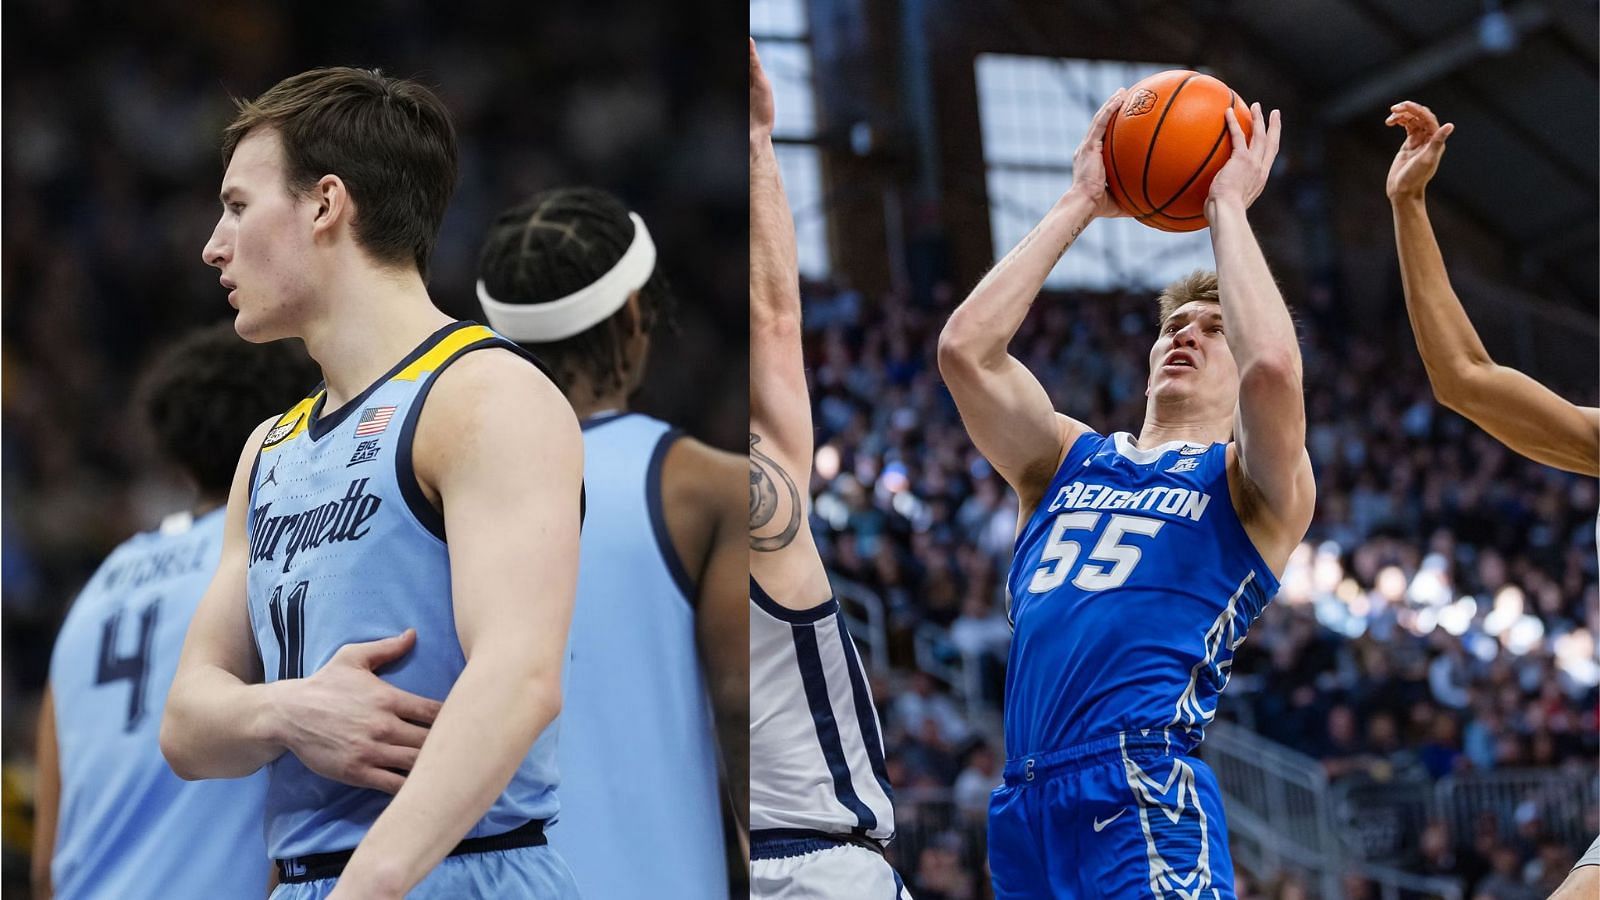 7 most underrated college basketball teams that could make a deep run